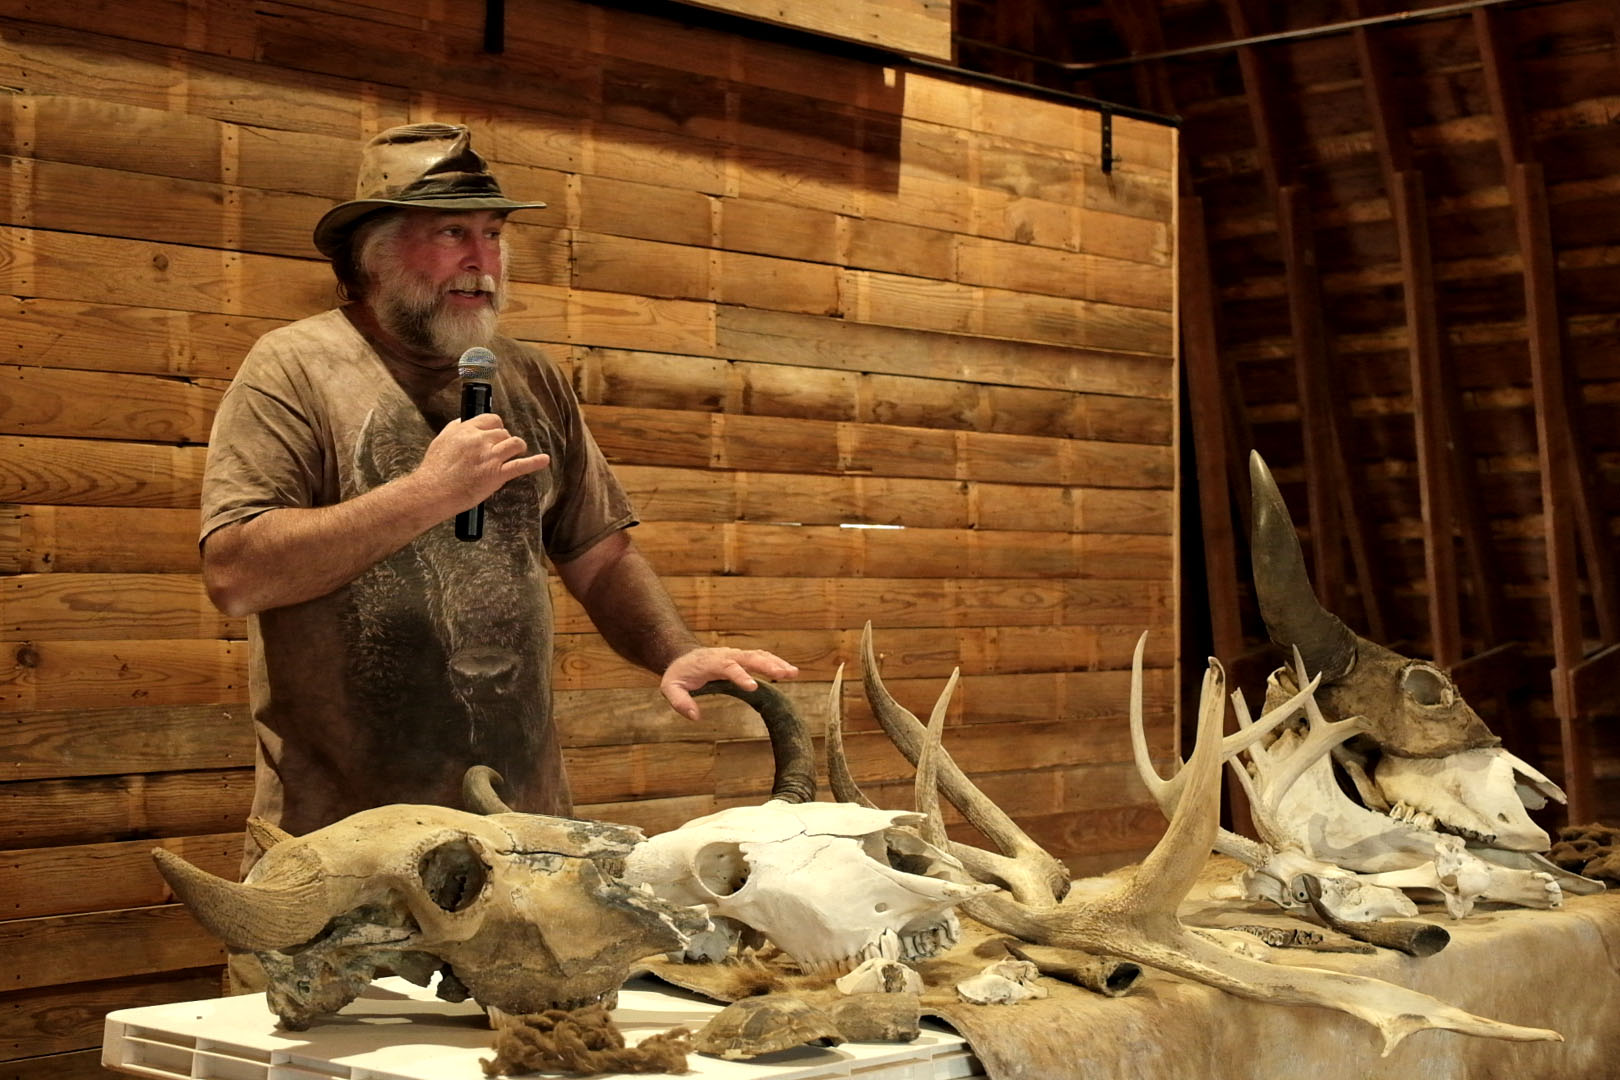 George LaRoux addressing audience near table with bison artifacts.